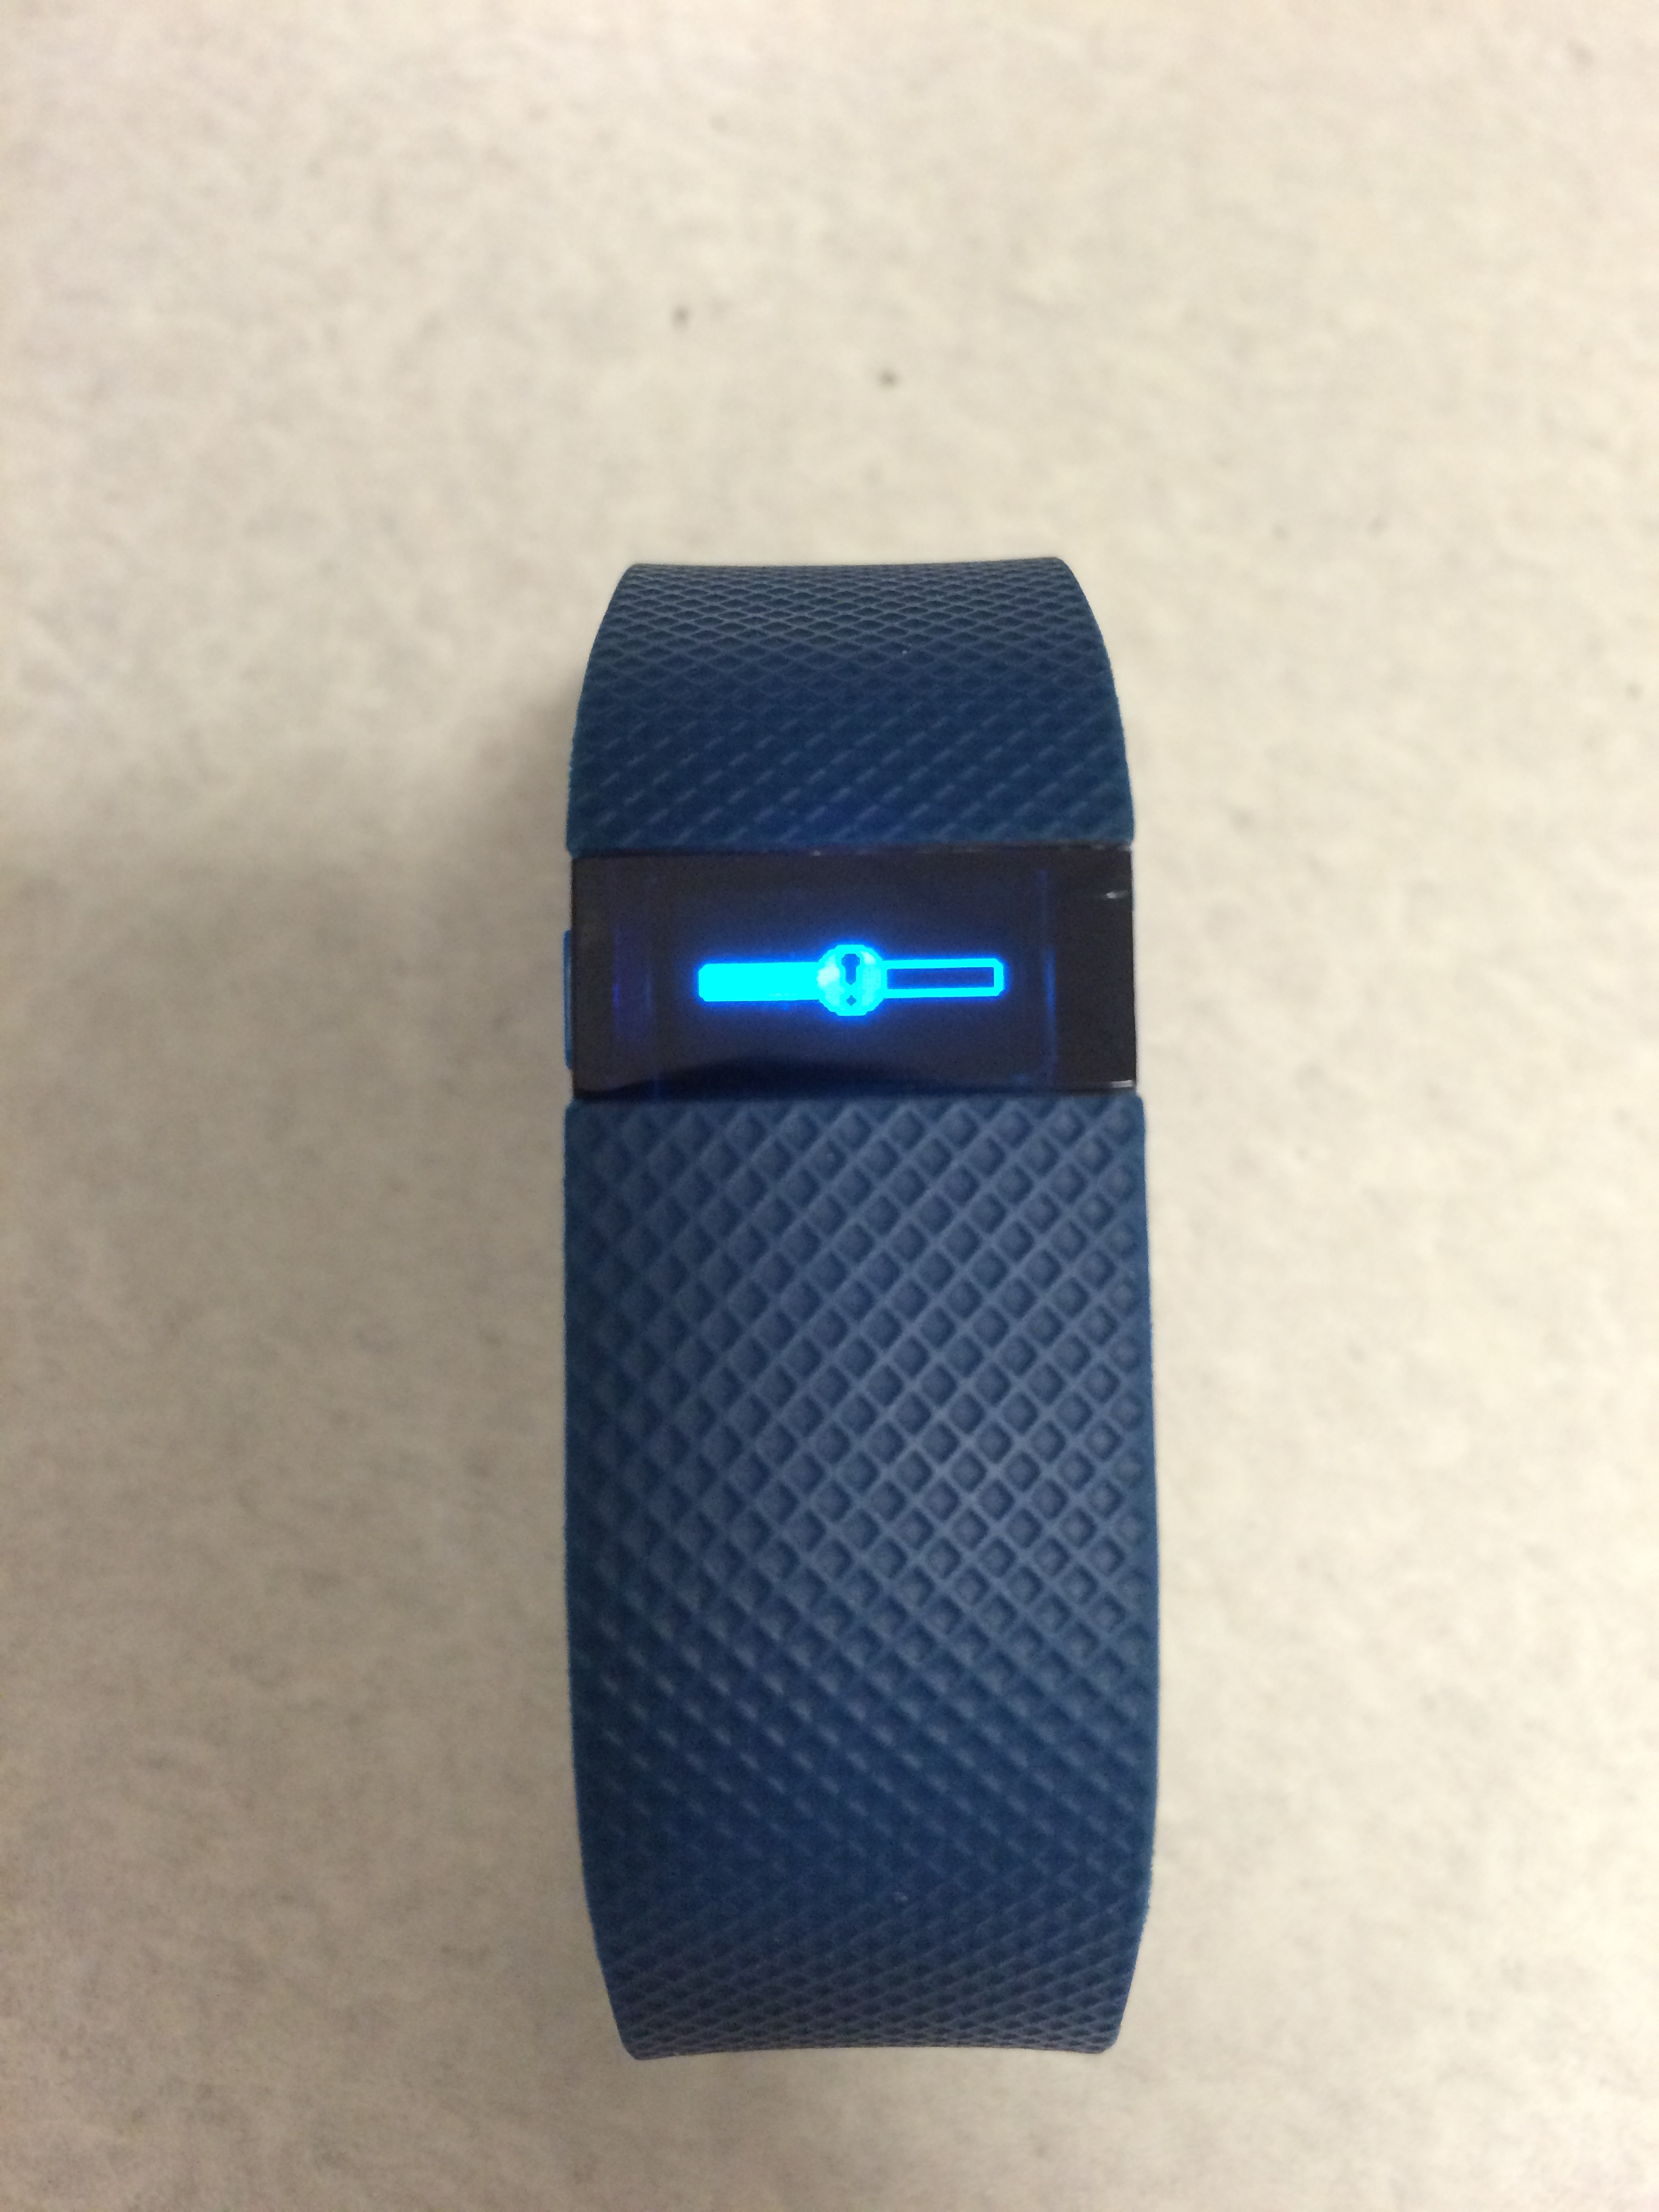 fitbit charge 2 frozen